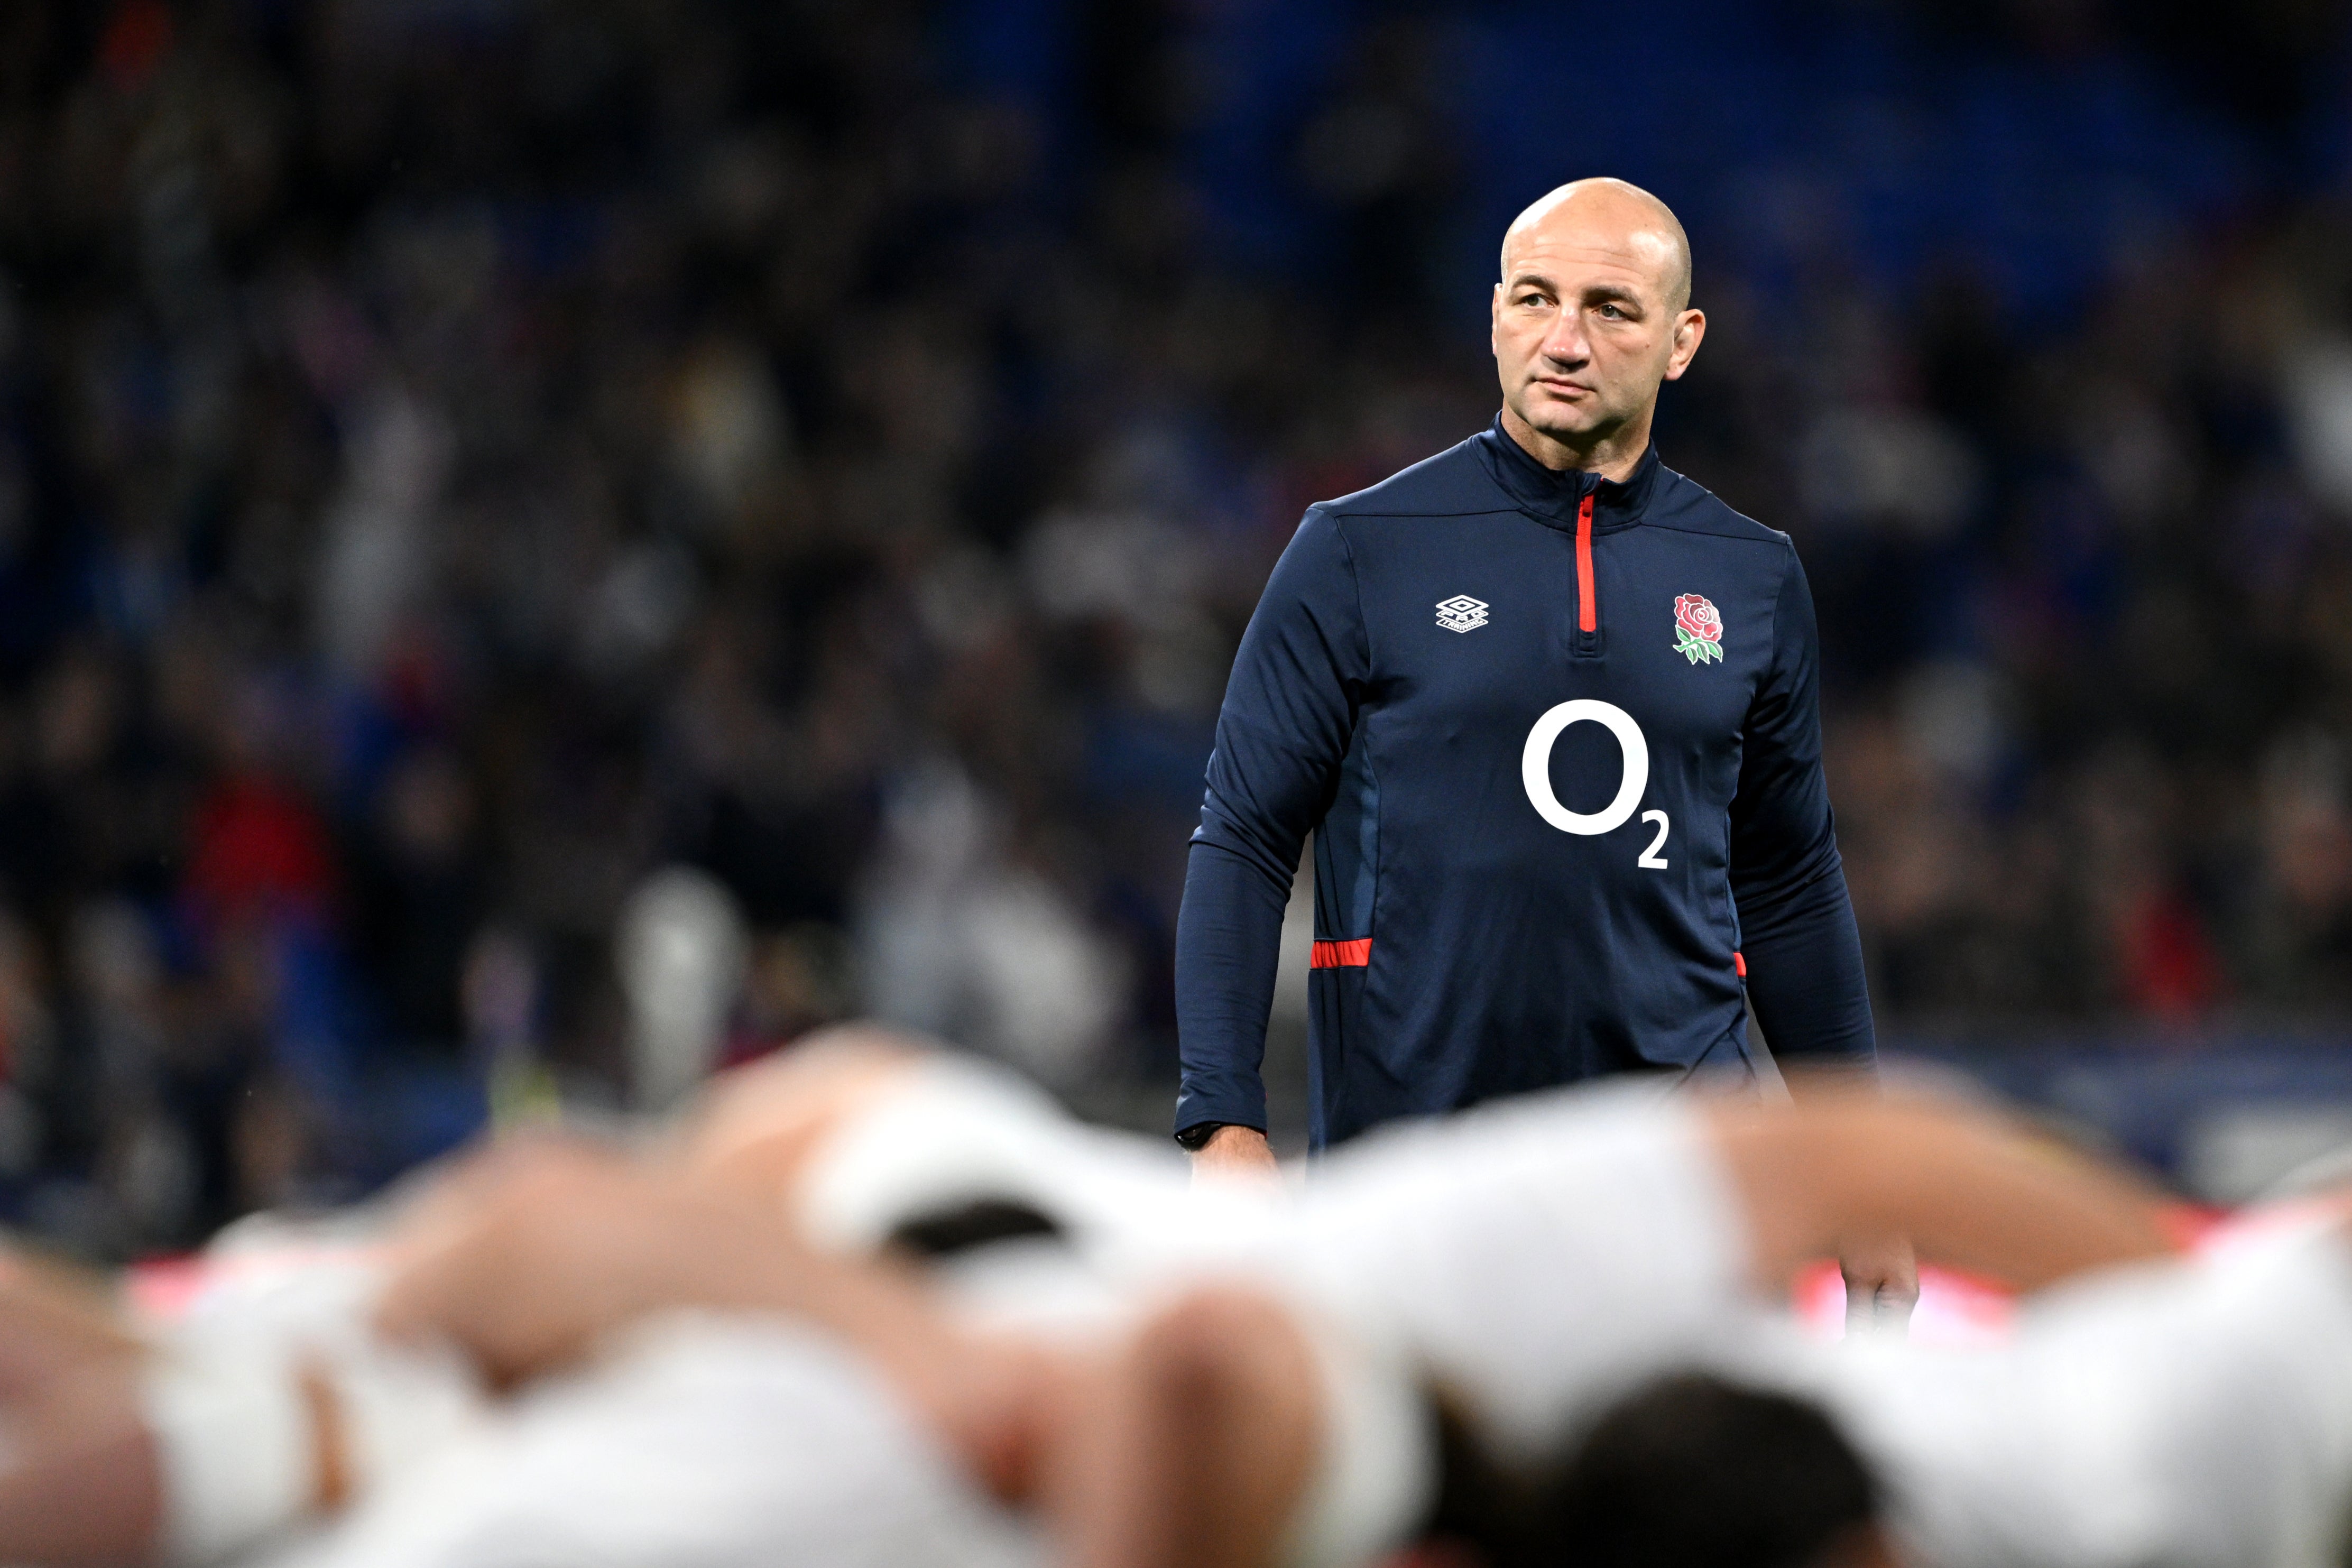 Steve Borthwick hopes that England can build from their Six Nations